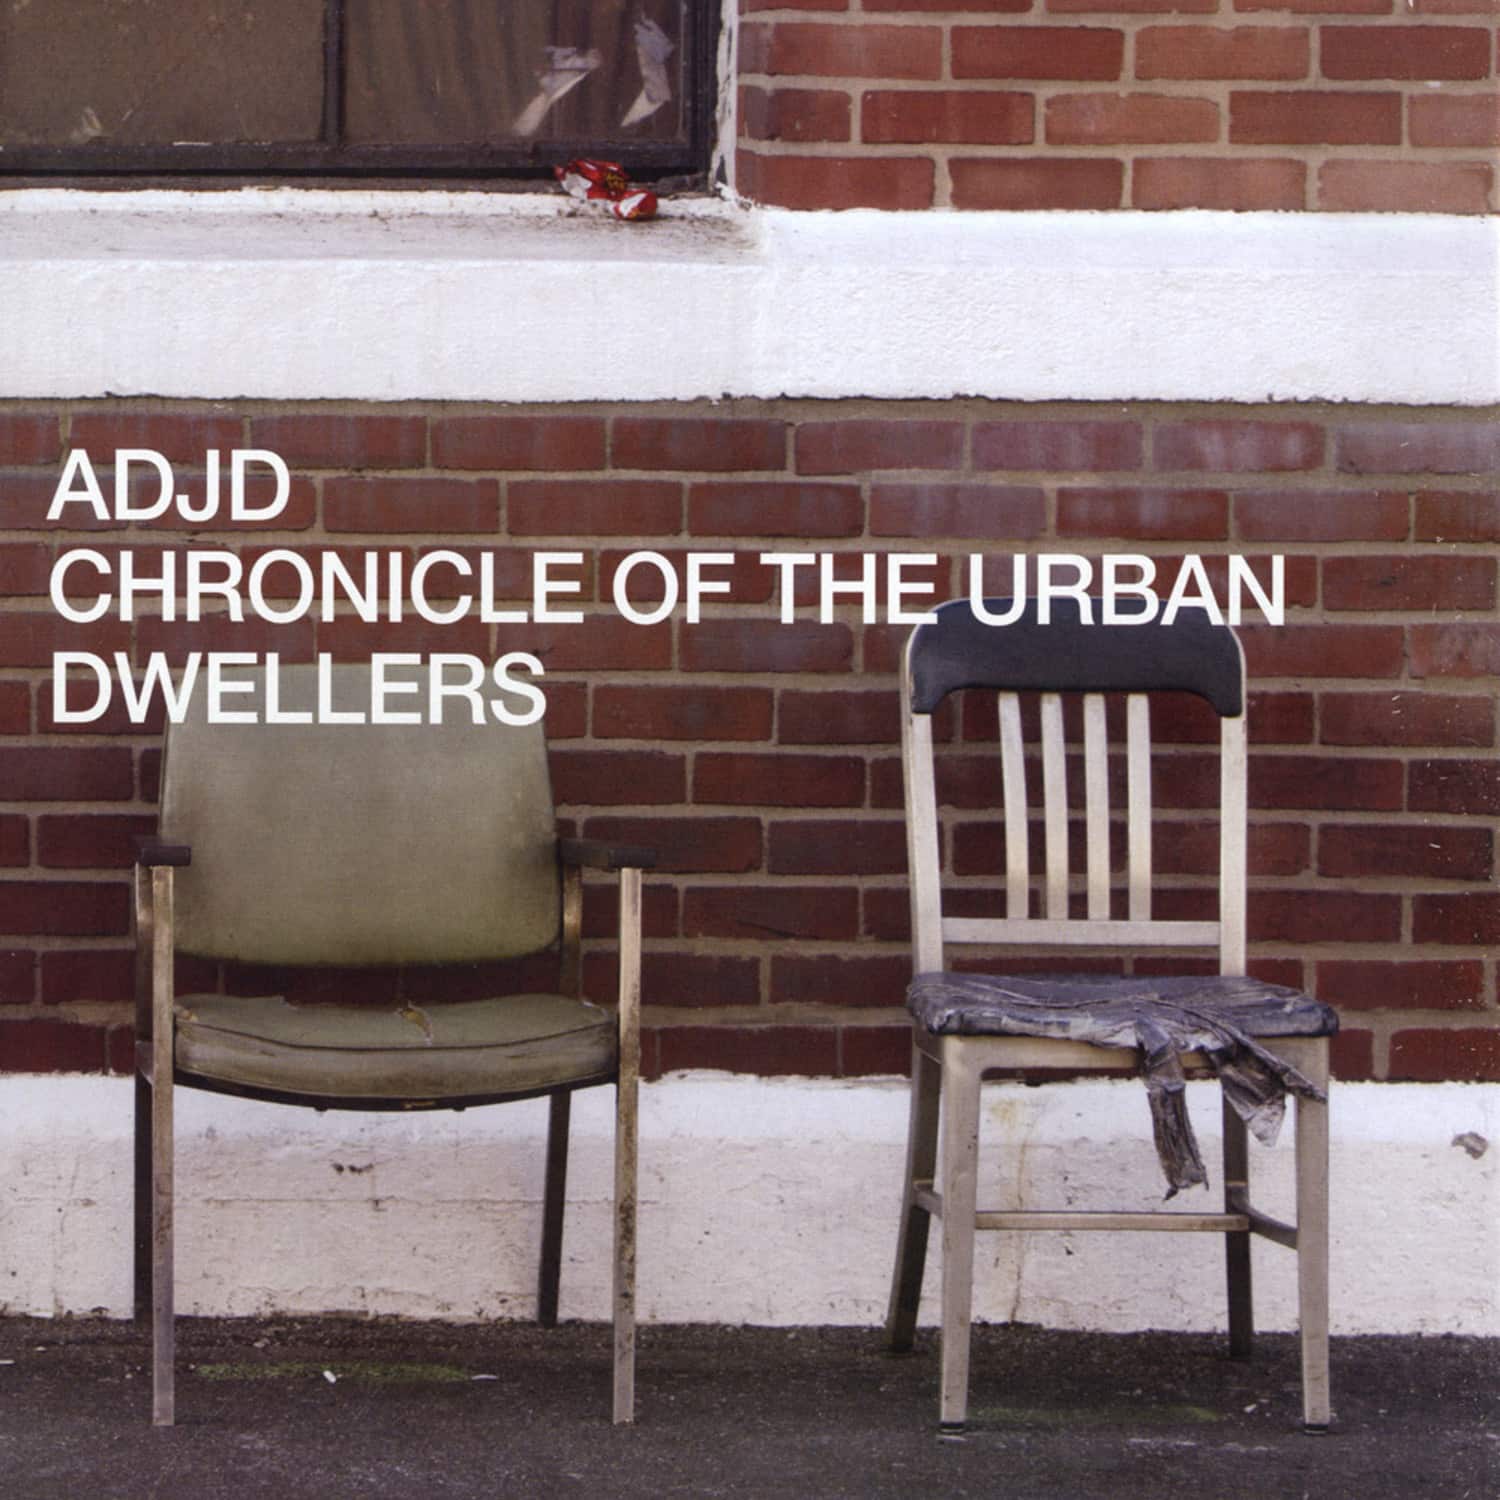 ADJD - CHRONICLES OF THE URBAN DWELLERS 